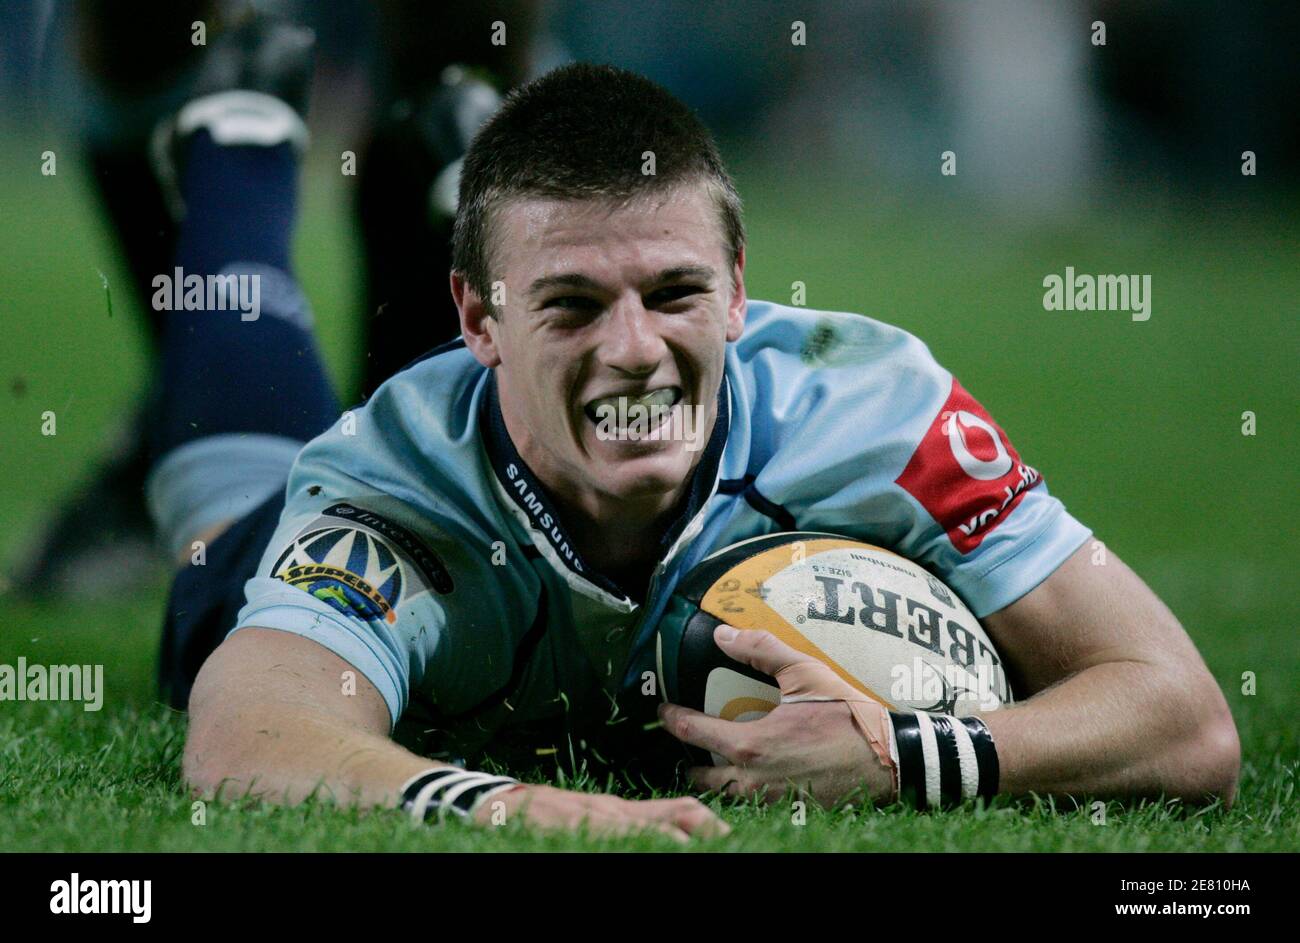 Rob Horne of the Waratahs from Australia reacts as he scores against the Sharks from South Africa during their Super 14 semi-final rugby match in Sydney May 24, 2008. REUTERS/Will Burgess    (AUSTRALIA) Stock Photo